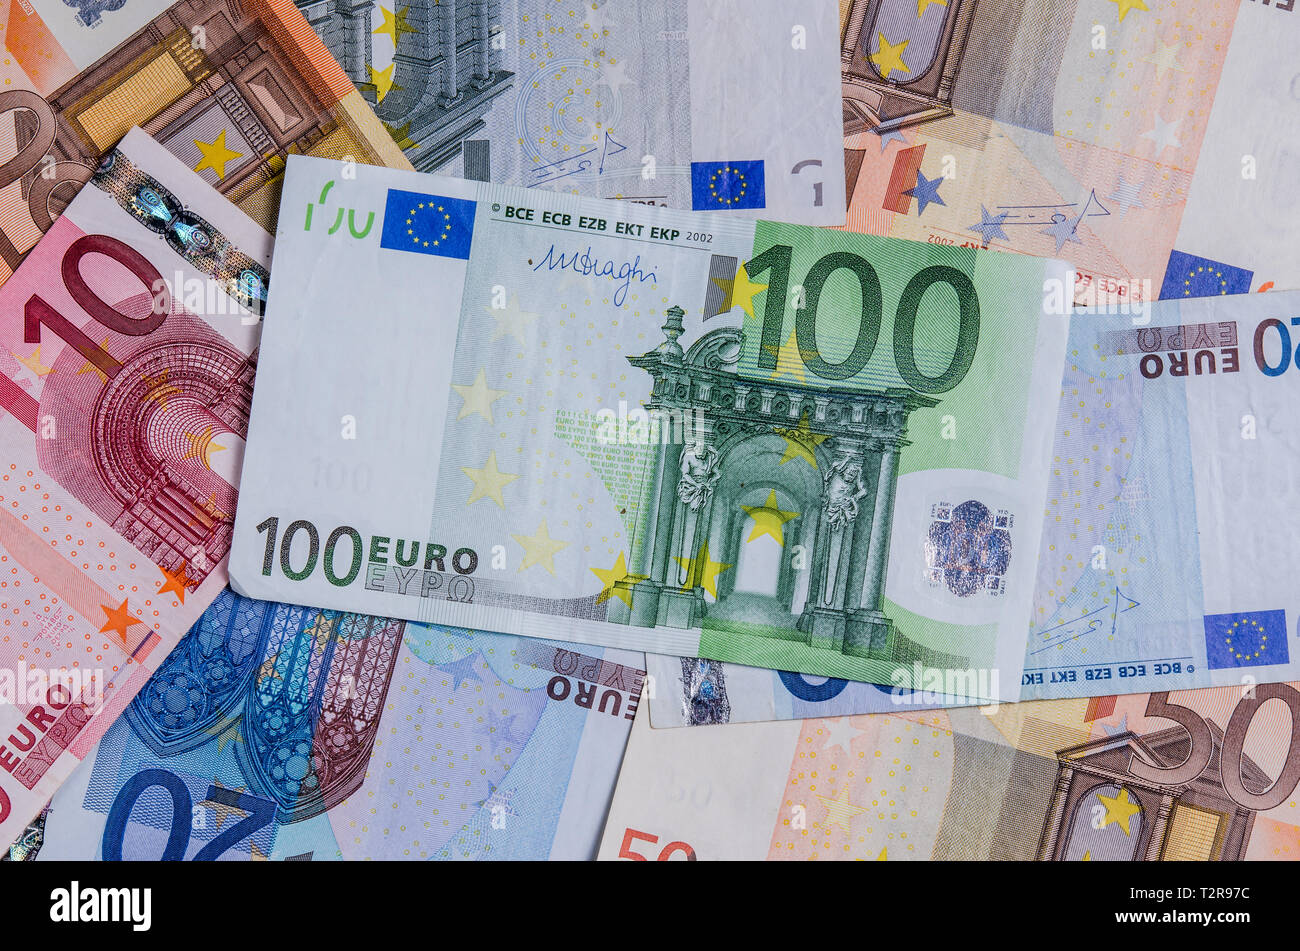 Euro banknotes from the first series of various denominations Stock ...